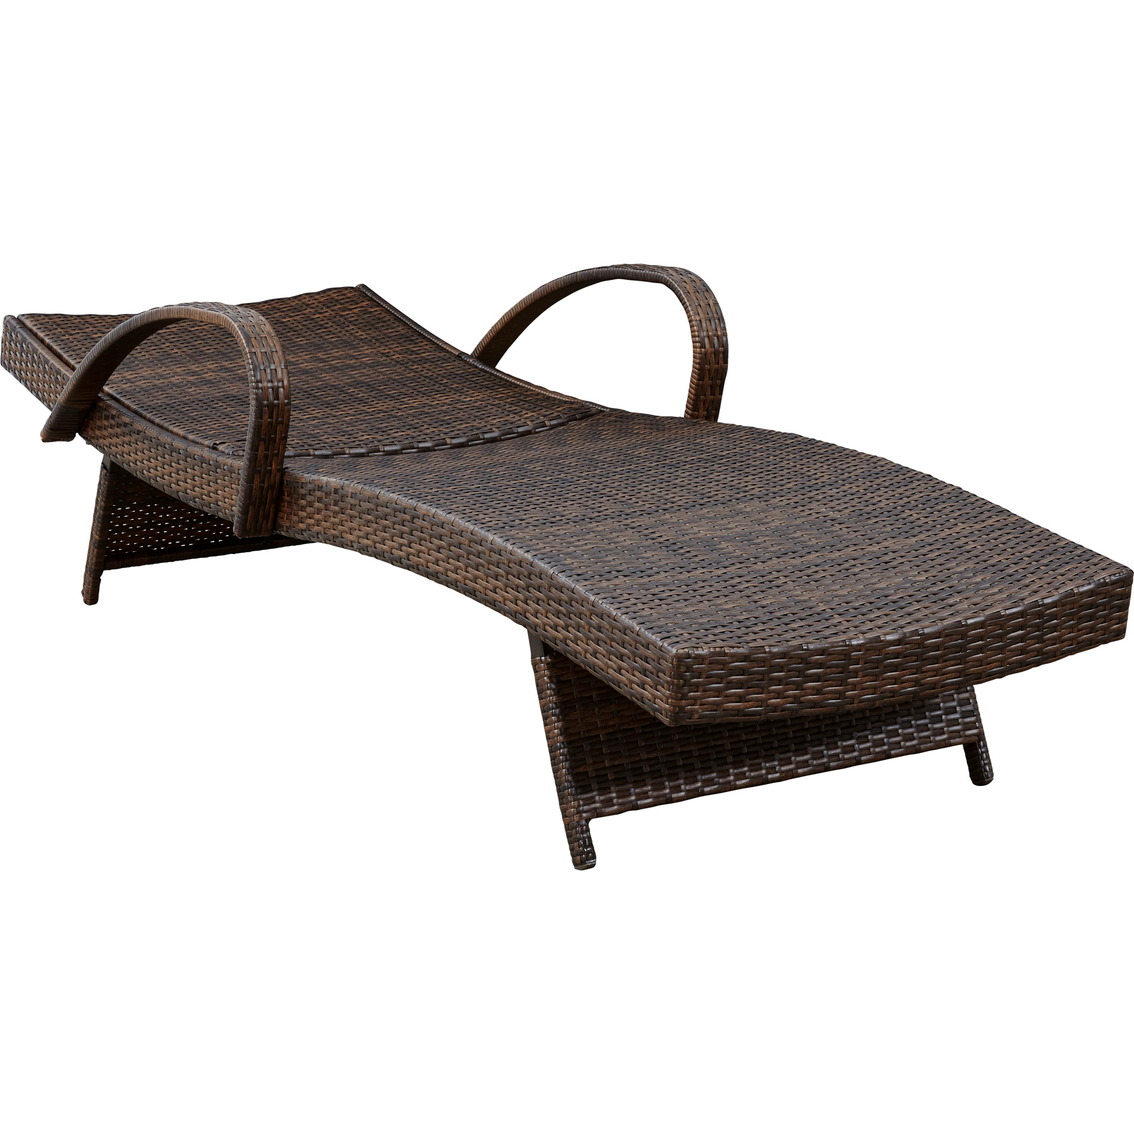 Signature Design by Ashley Kantana Outdoor Chaise Lounge 2 pk. - Image 6 of 6